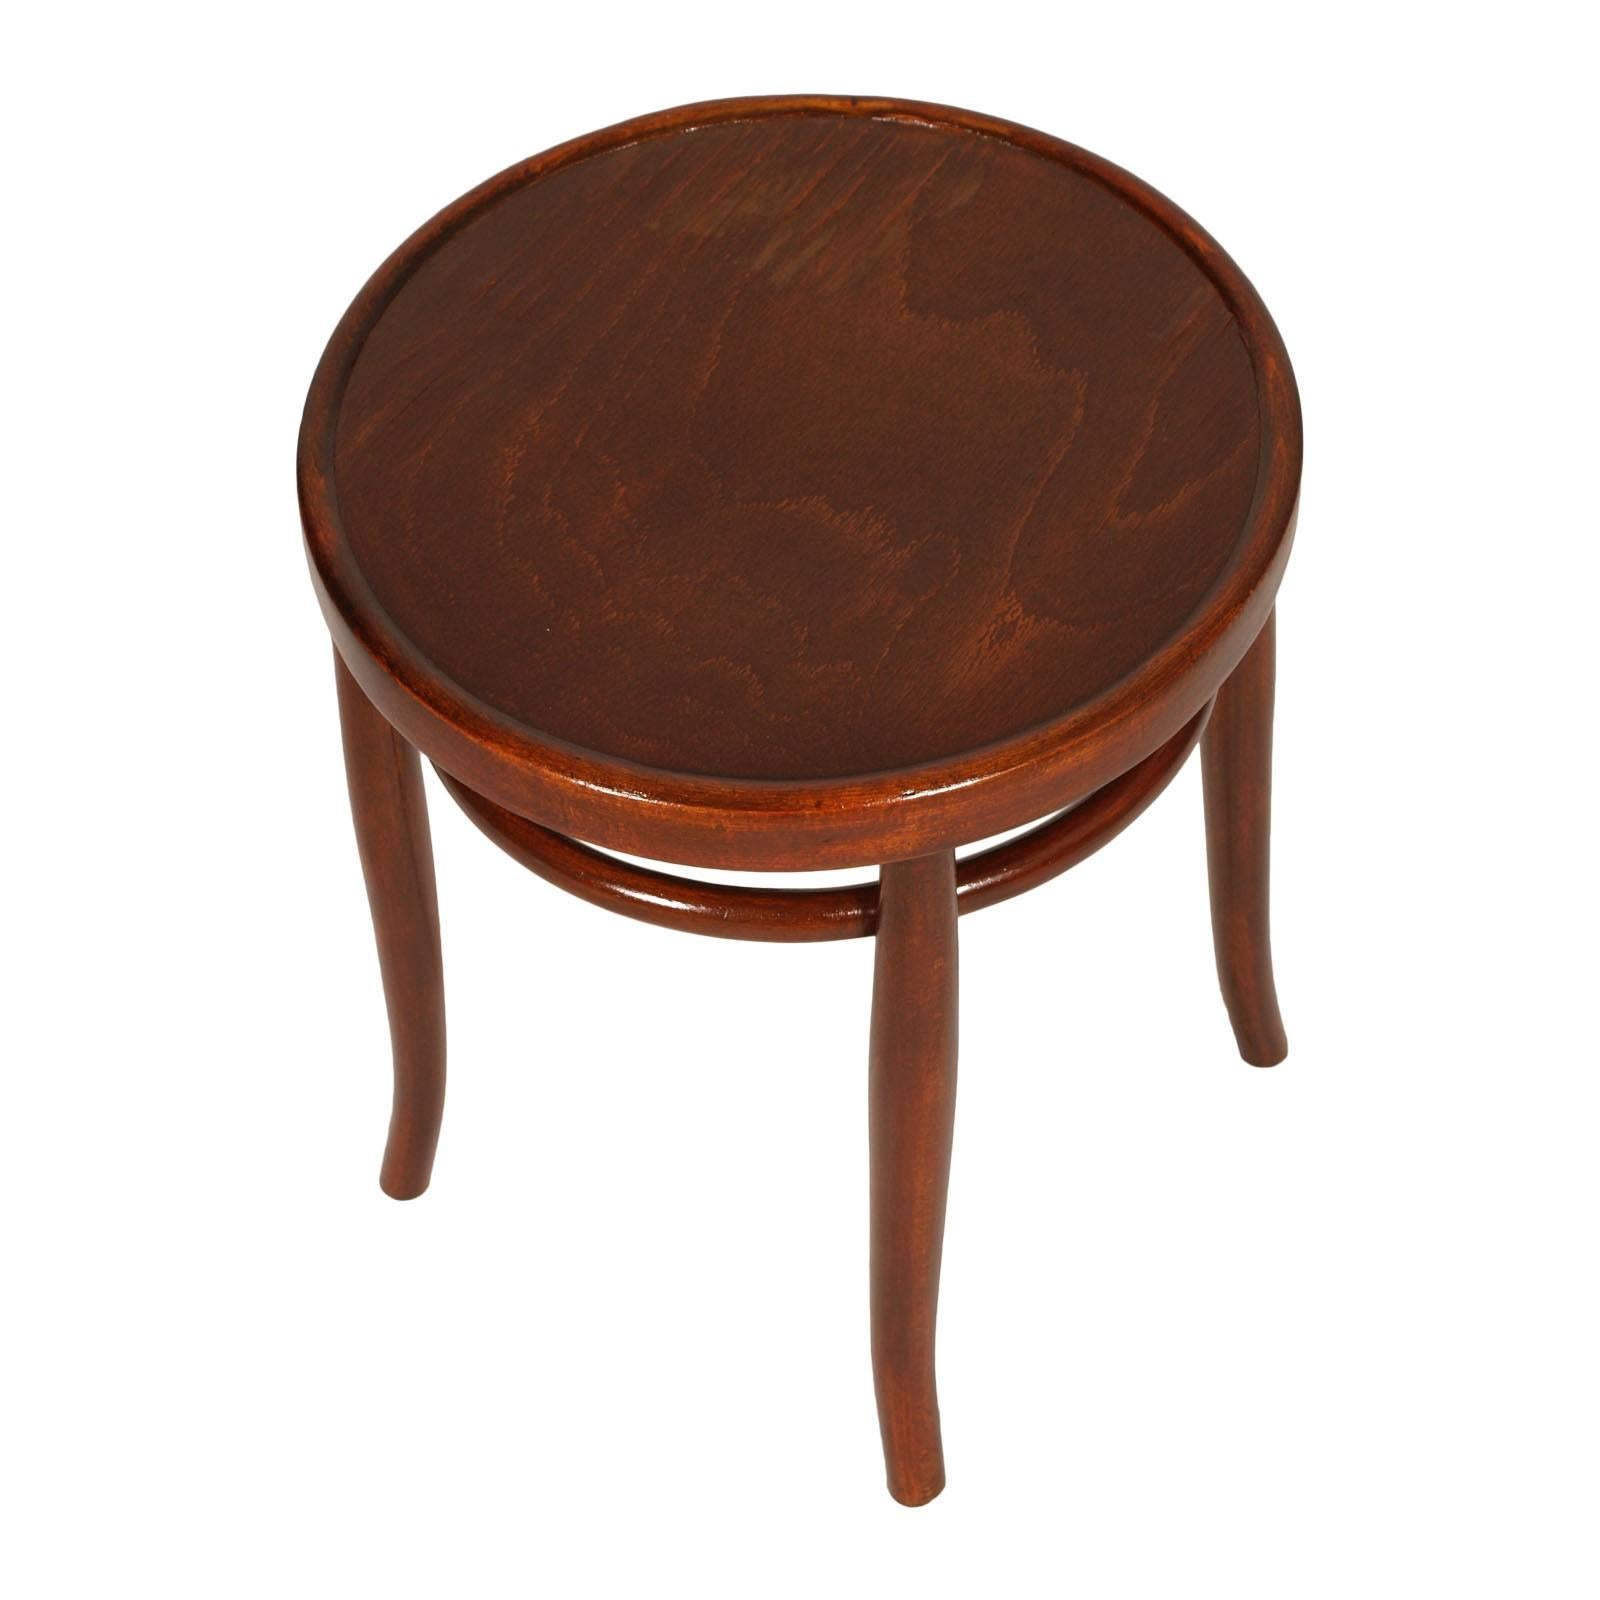 Early 20th century round occasional bentwood coffee table by Thonet polished to wax
Measures cm: Height 45, diameter 37.